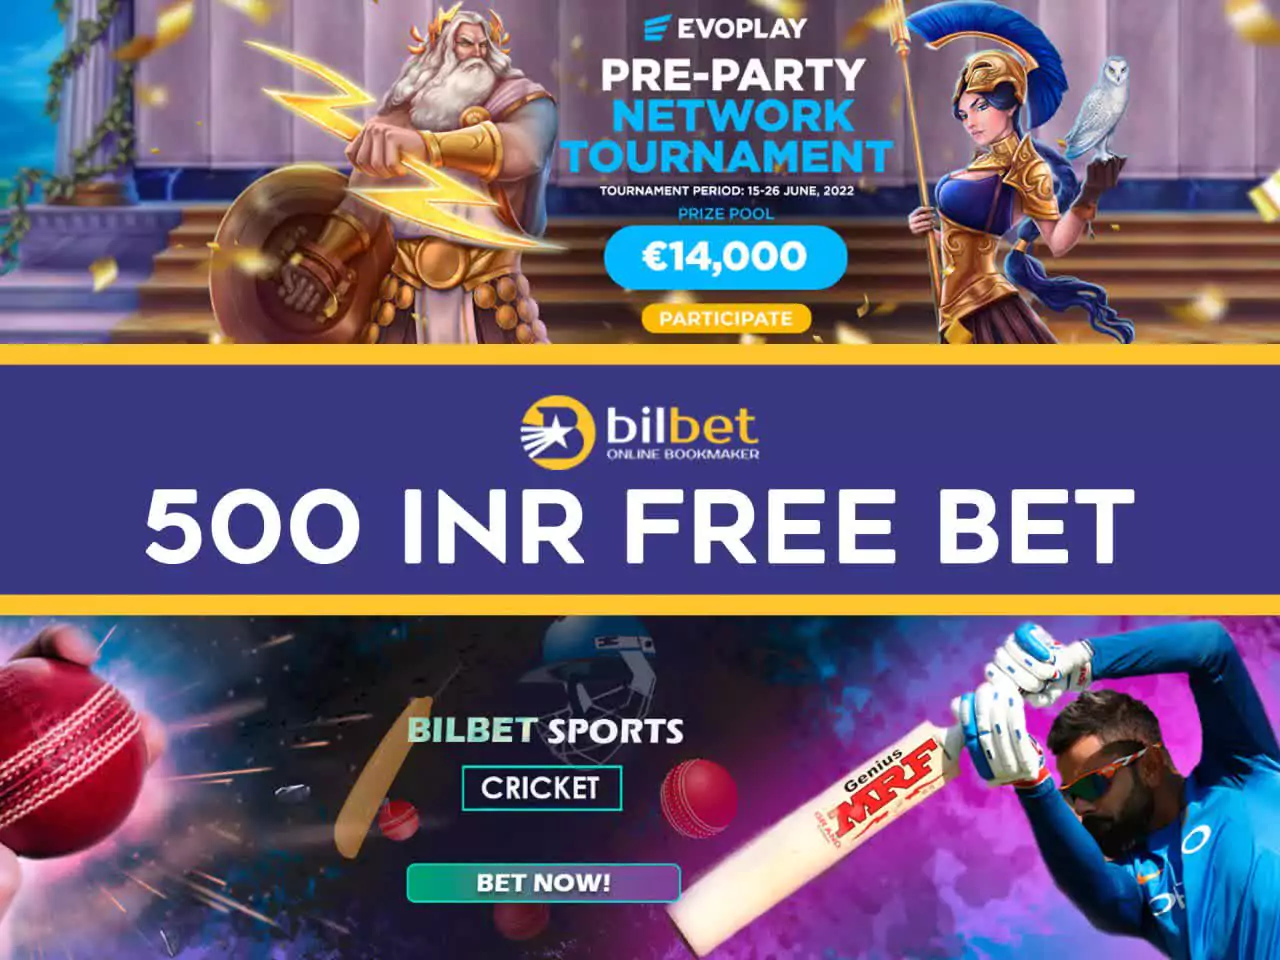 Get additional 500 INR for free bets.